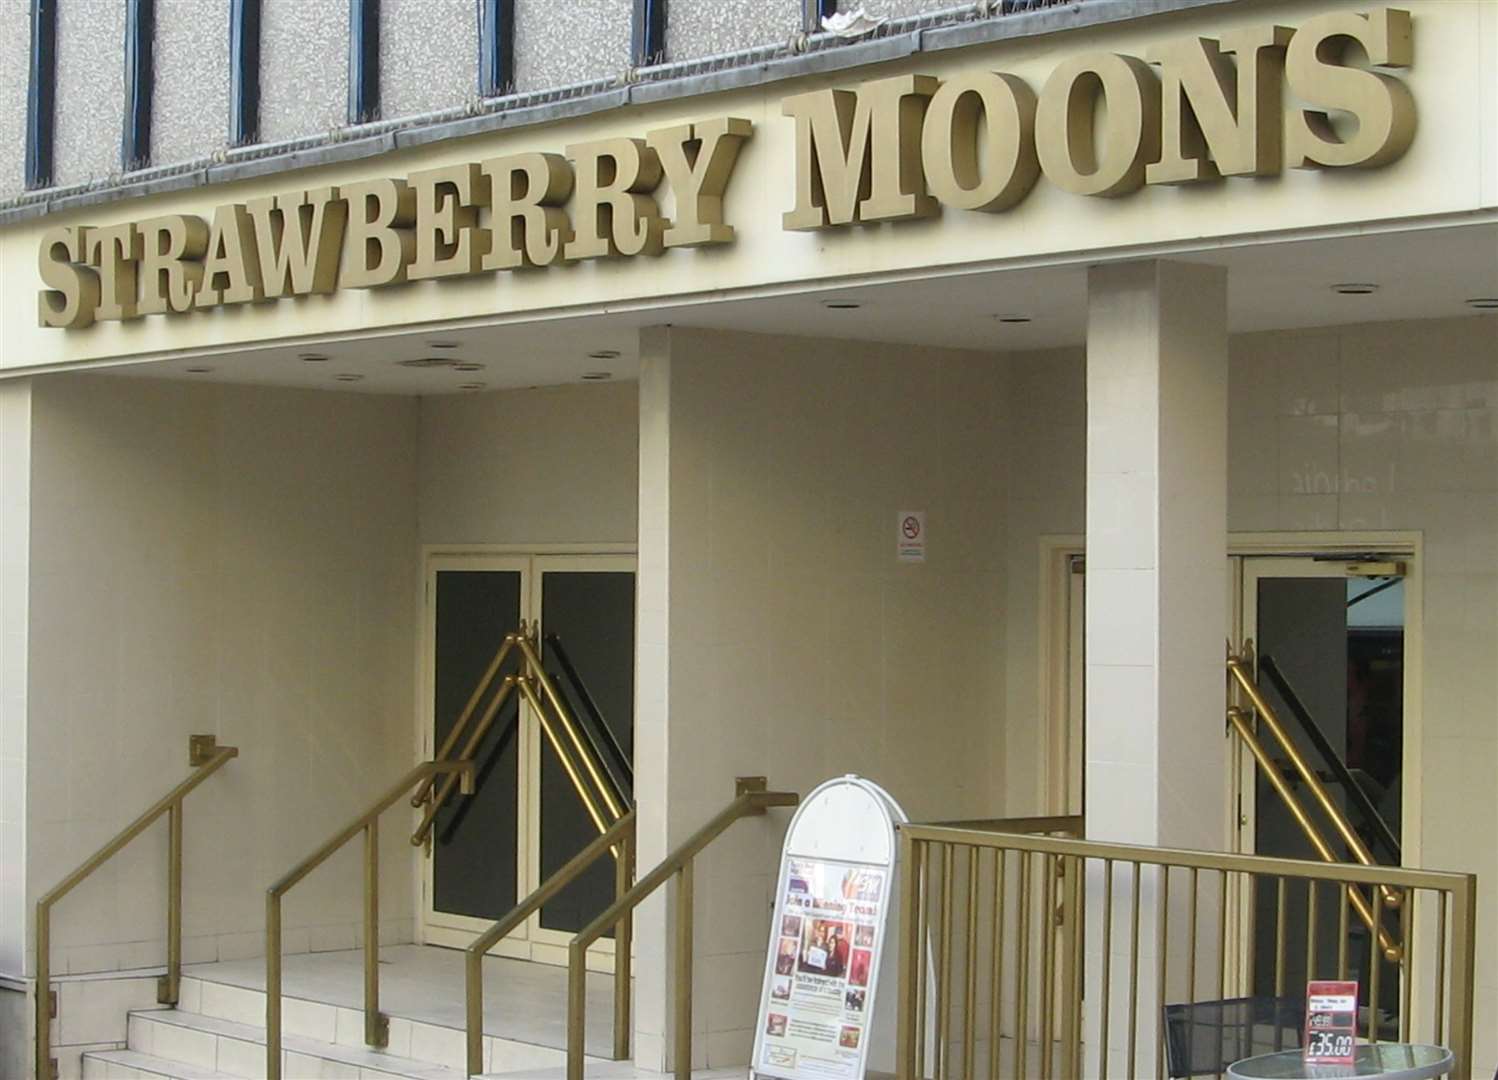 Strawberry Moons nightclub has been part of Maidstone for 25 years